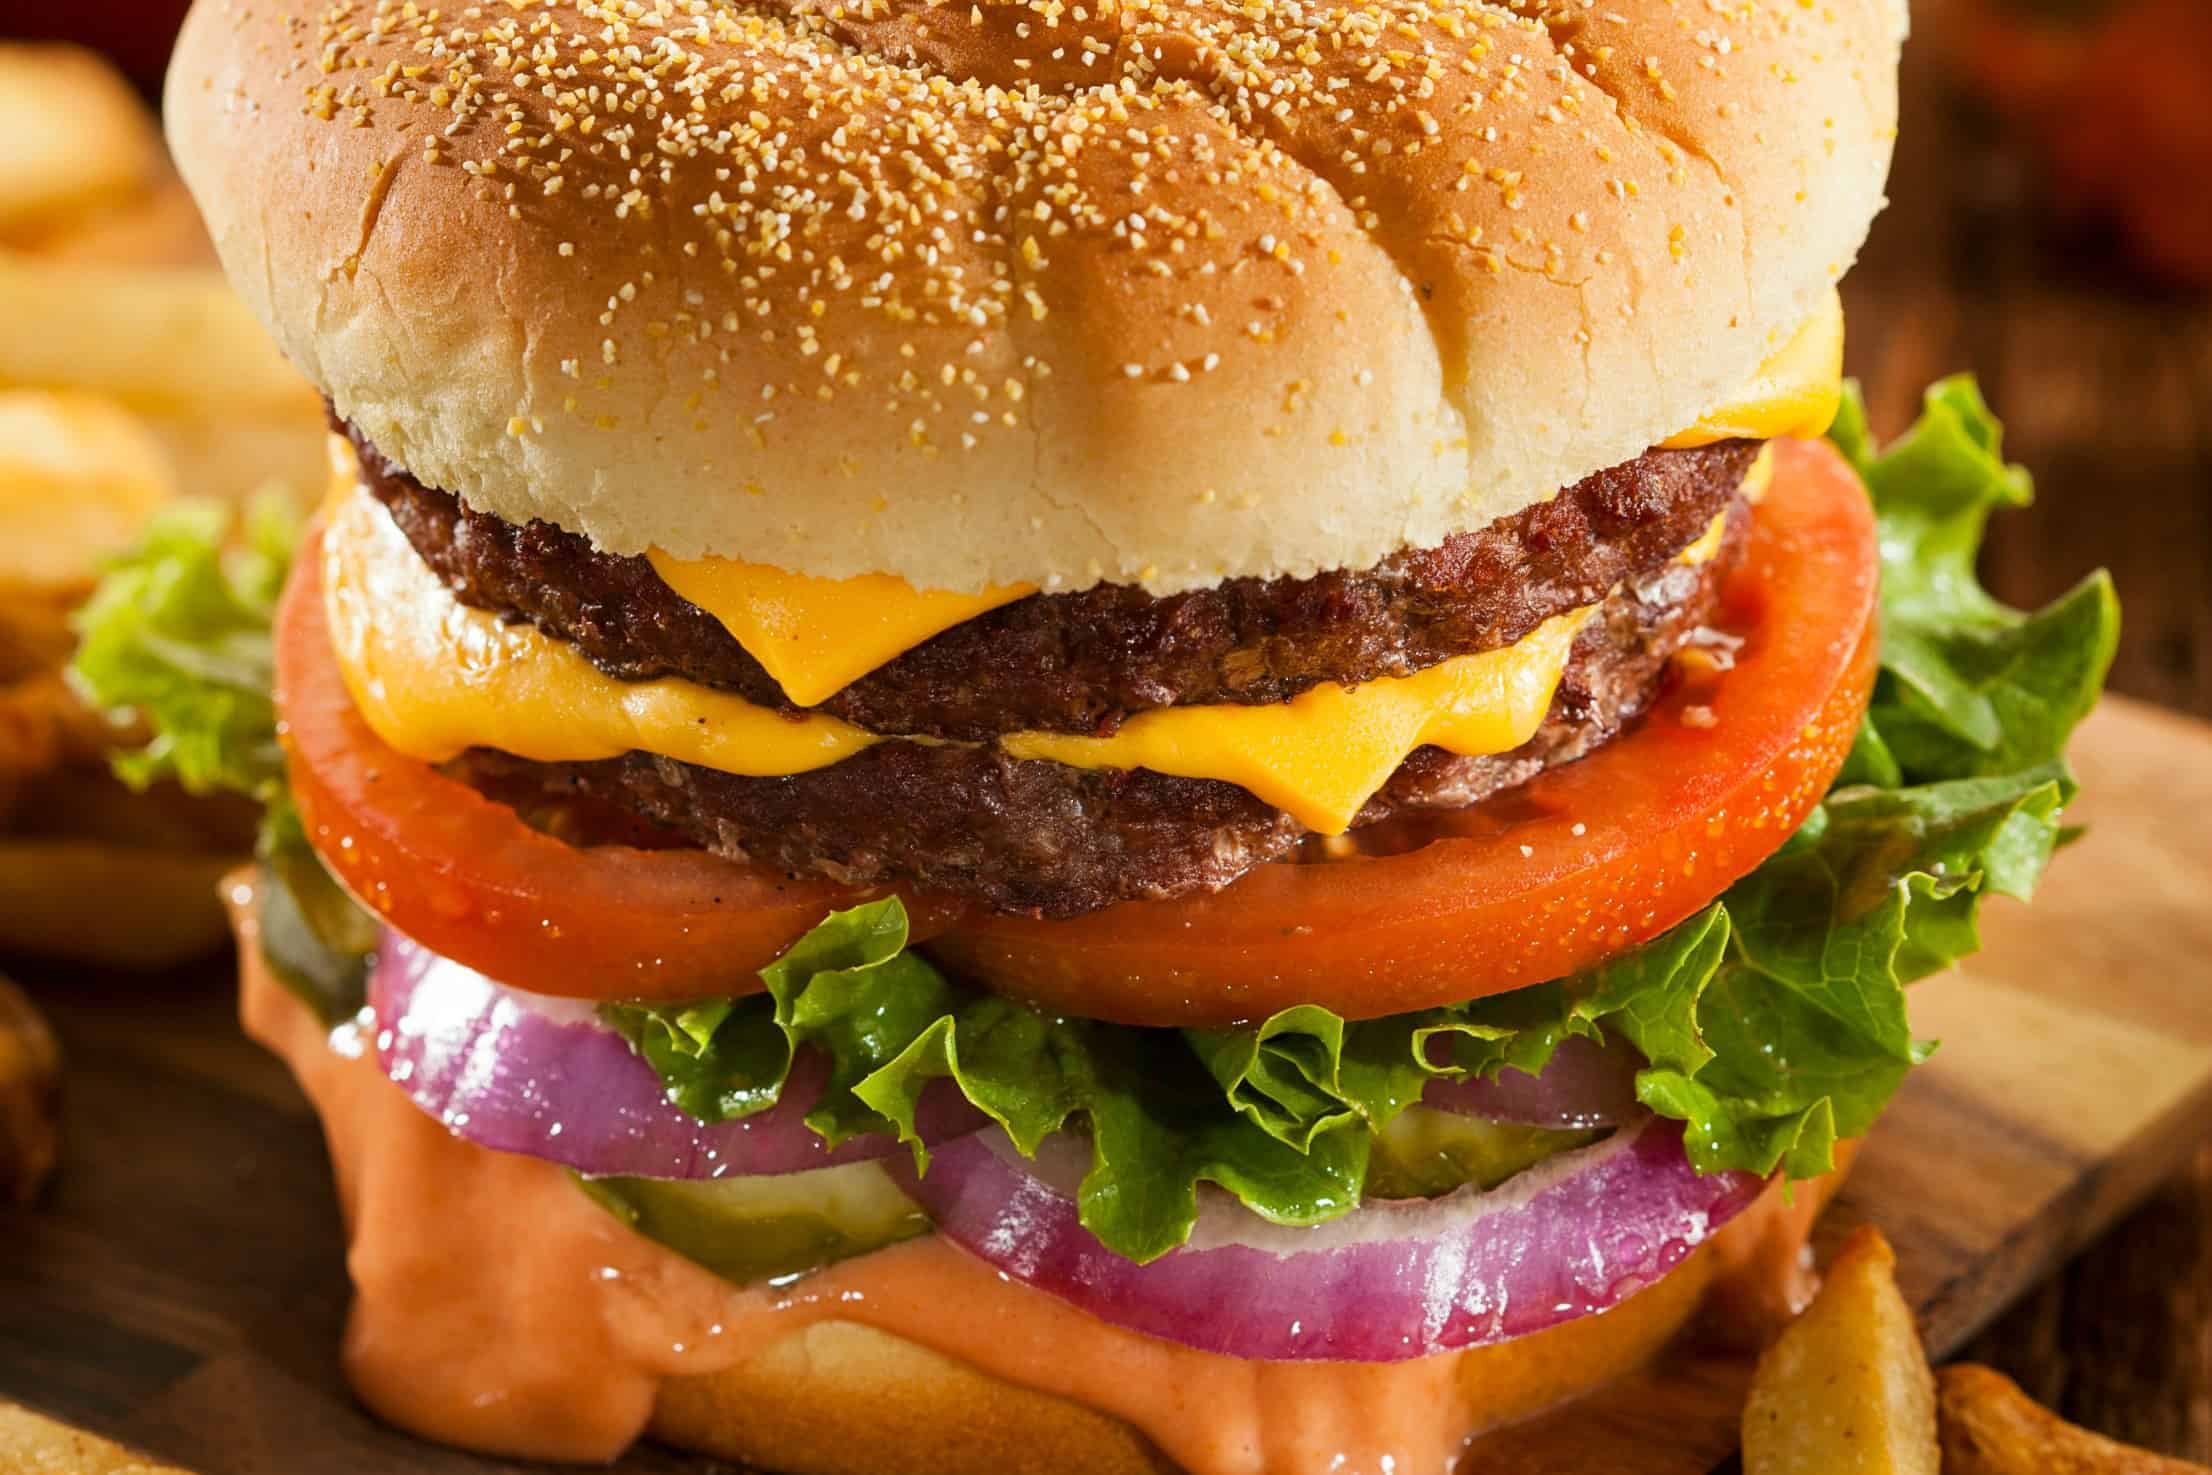 Read these 10 tips for better burgers to make every single hamburger recipe better by miles: juicy, flavorful and delicious! You won't beleive #4! #hamburgerrecipes #burgerrecipes www.savoryexperiments.com